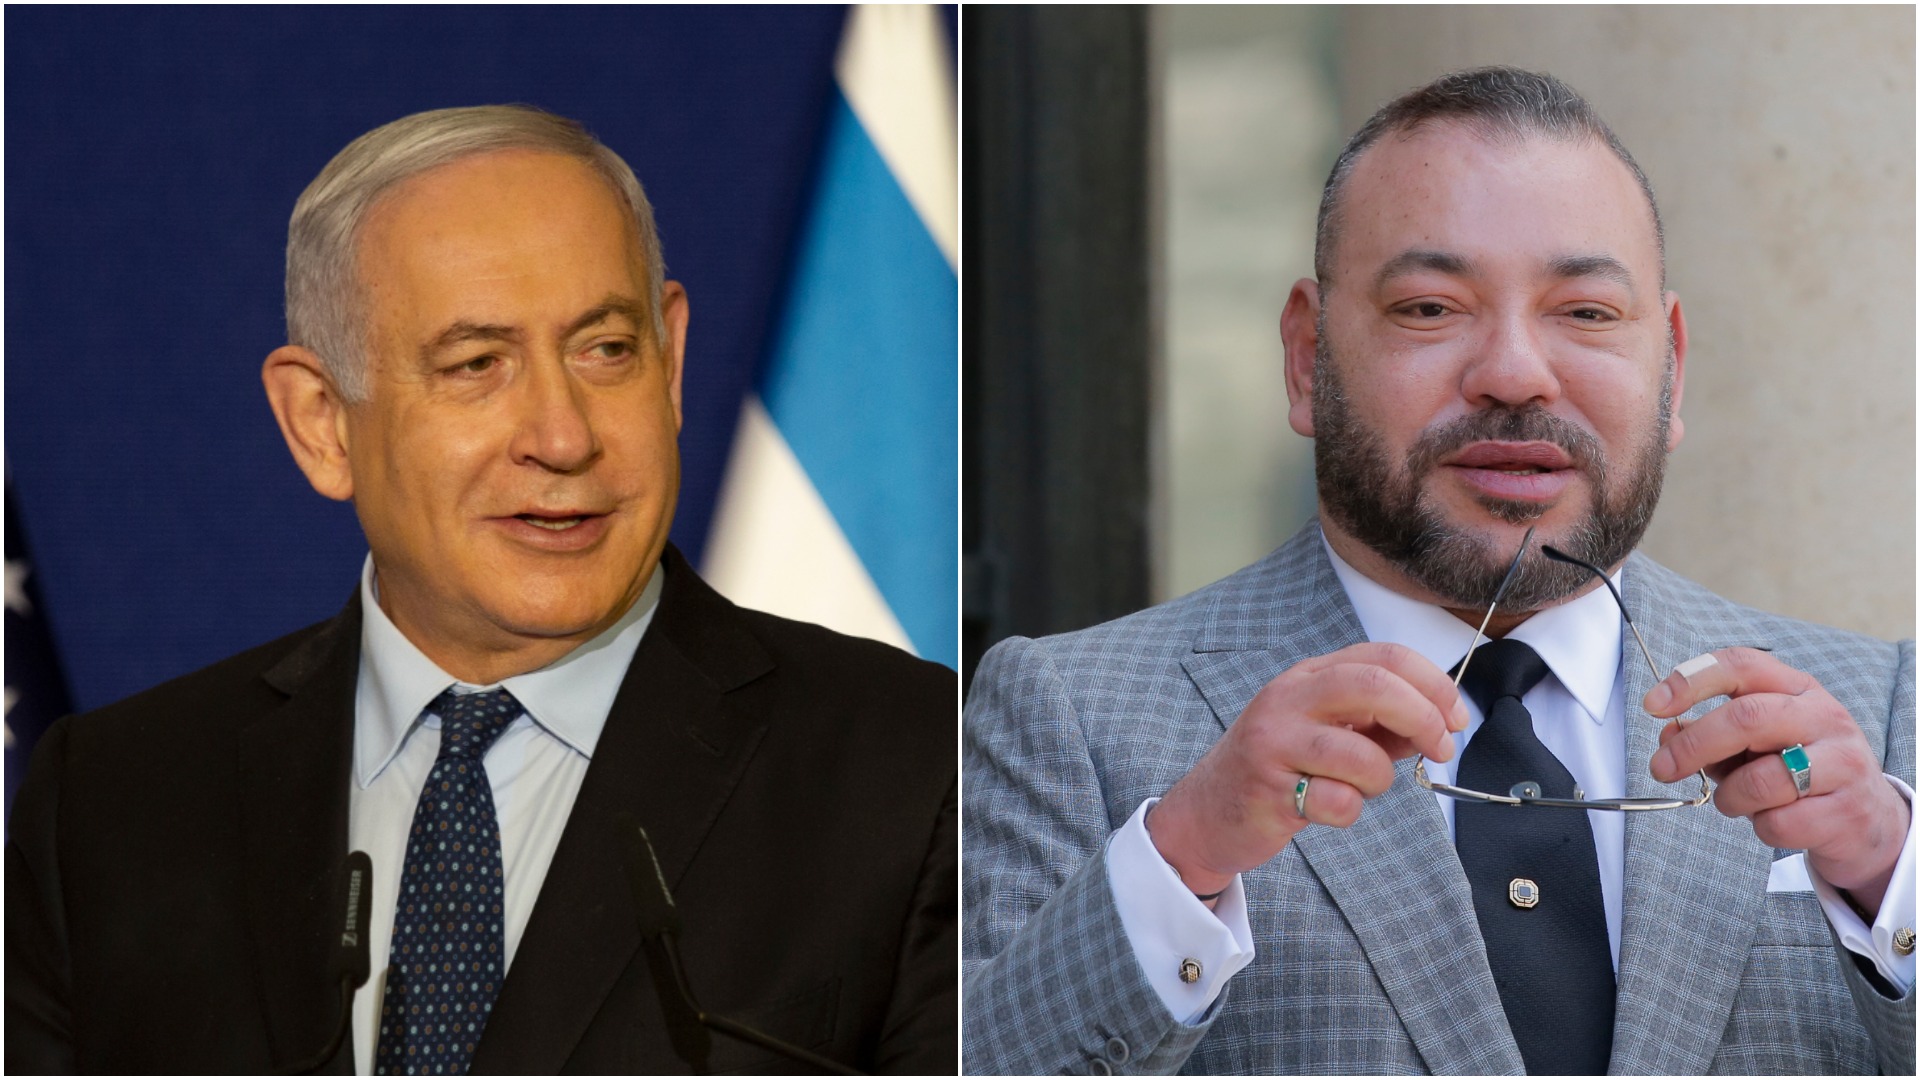 His Majesty, King of Morocco, Mohammed VI had a telephone call today with the Prime Minister of the State of Israel, Benjamin Netanyahu.